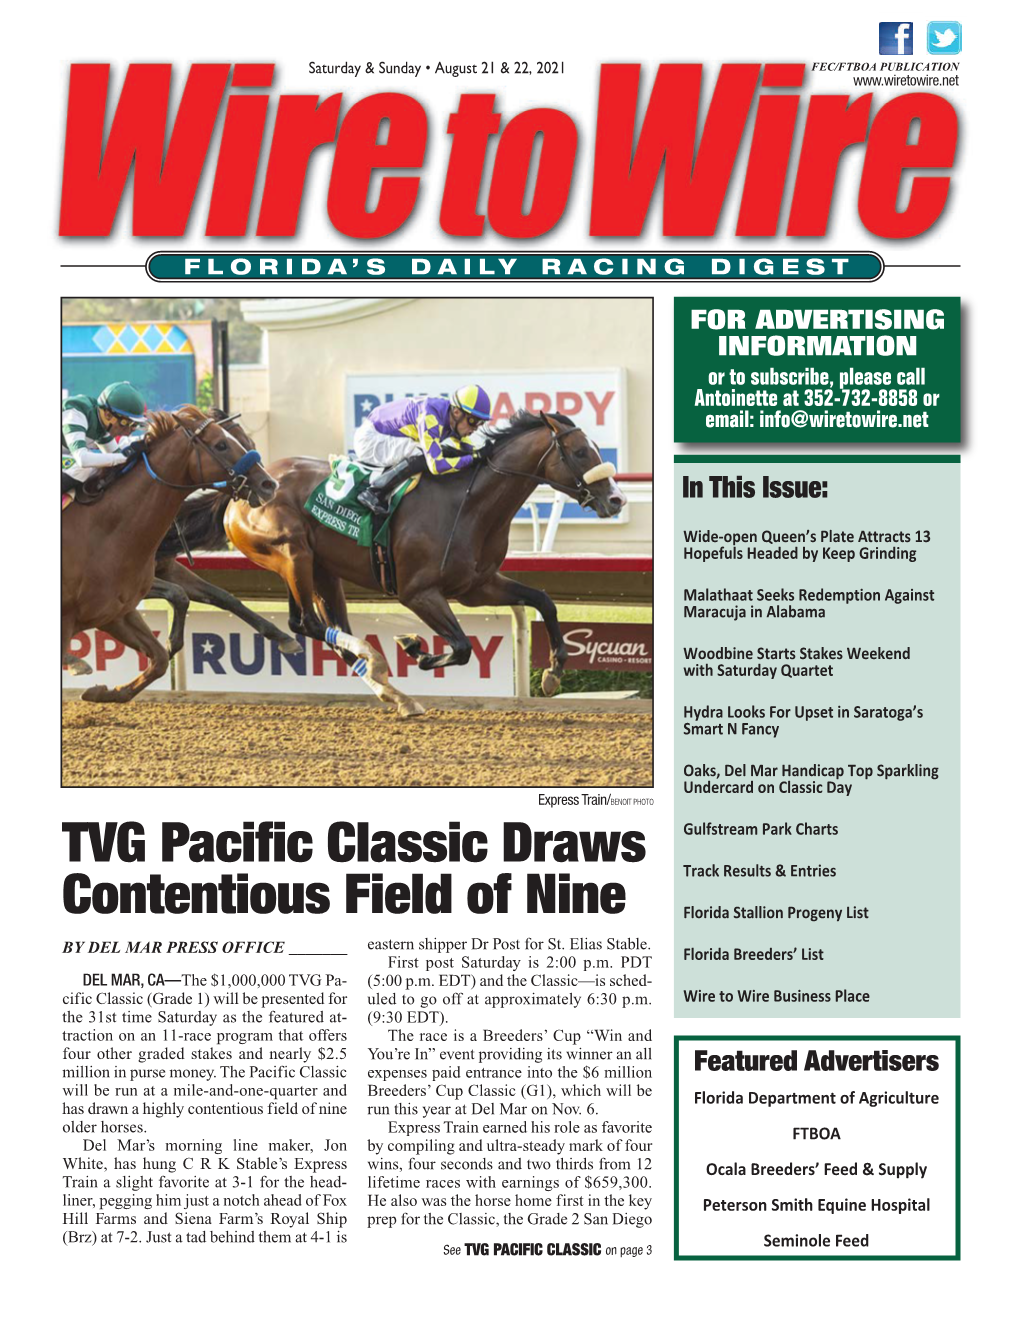 TVG Pacific Classic Draws Contentious Field of Nine